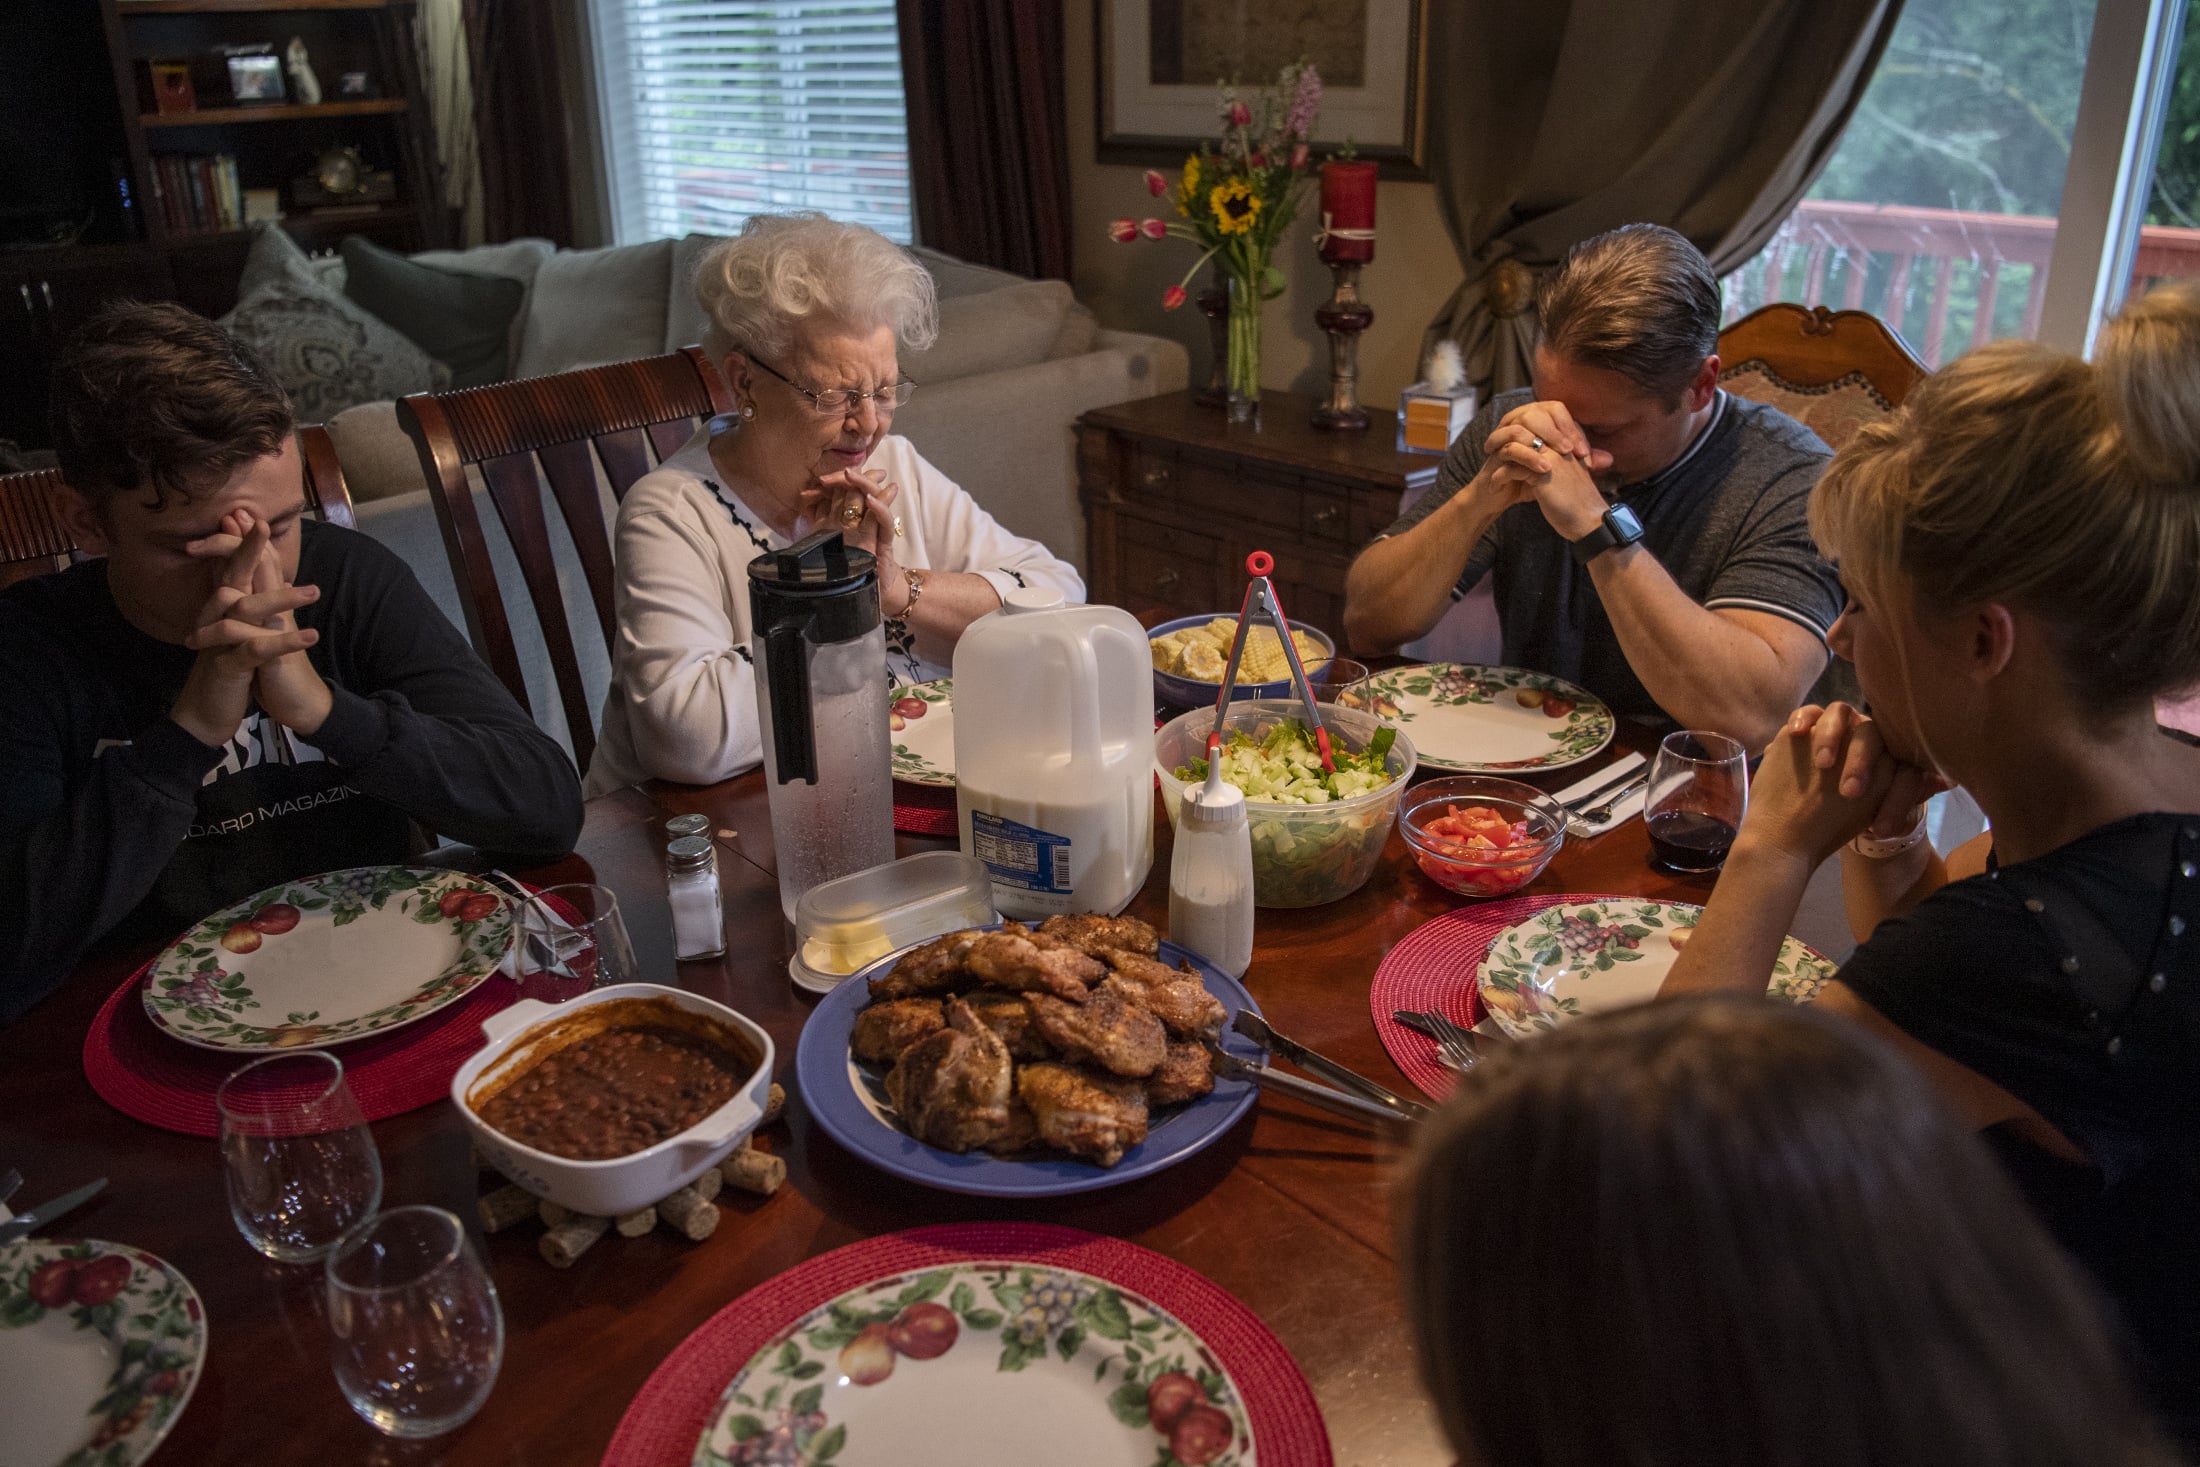 Vivian Church, center, leads a prayer with her grandson, Hal Stokes, right, and his family before dinner at their home in Ridgefield on Friday, May 17, 2019. Church moved in to the finished basement at her grandsonÕs home in 2015. Aside from a full kitchen, she has a whole living area to herself.